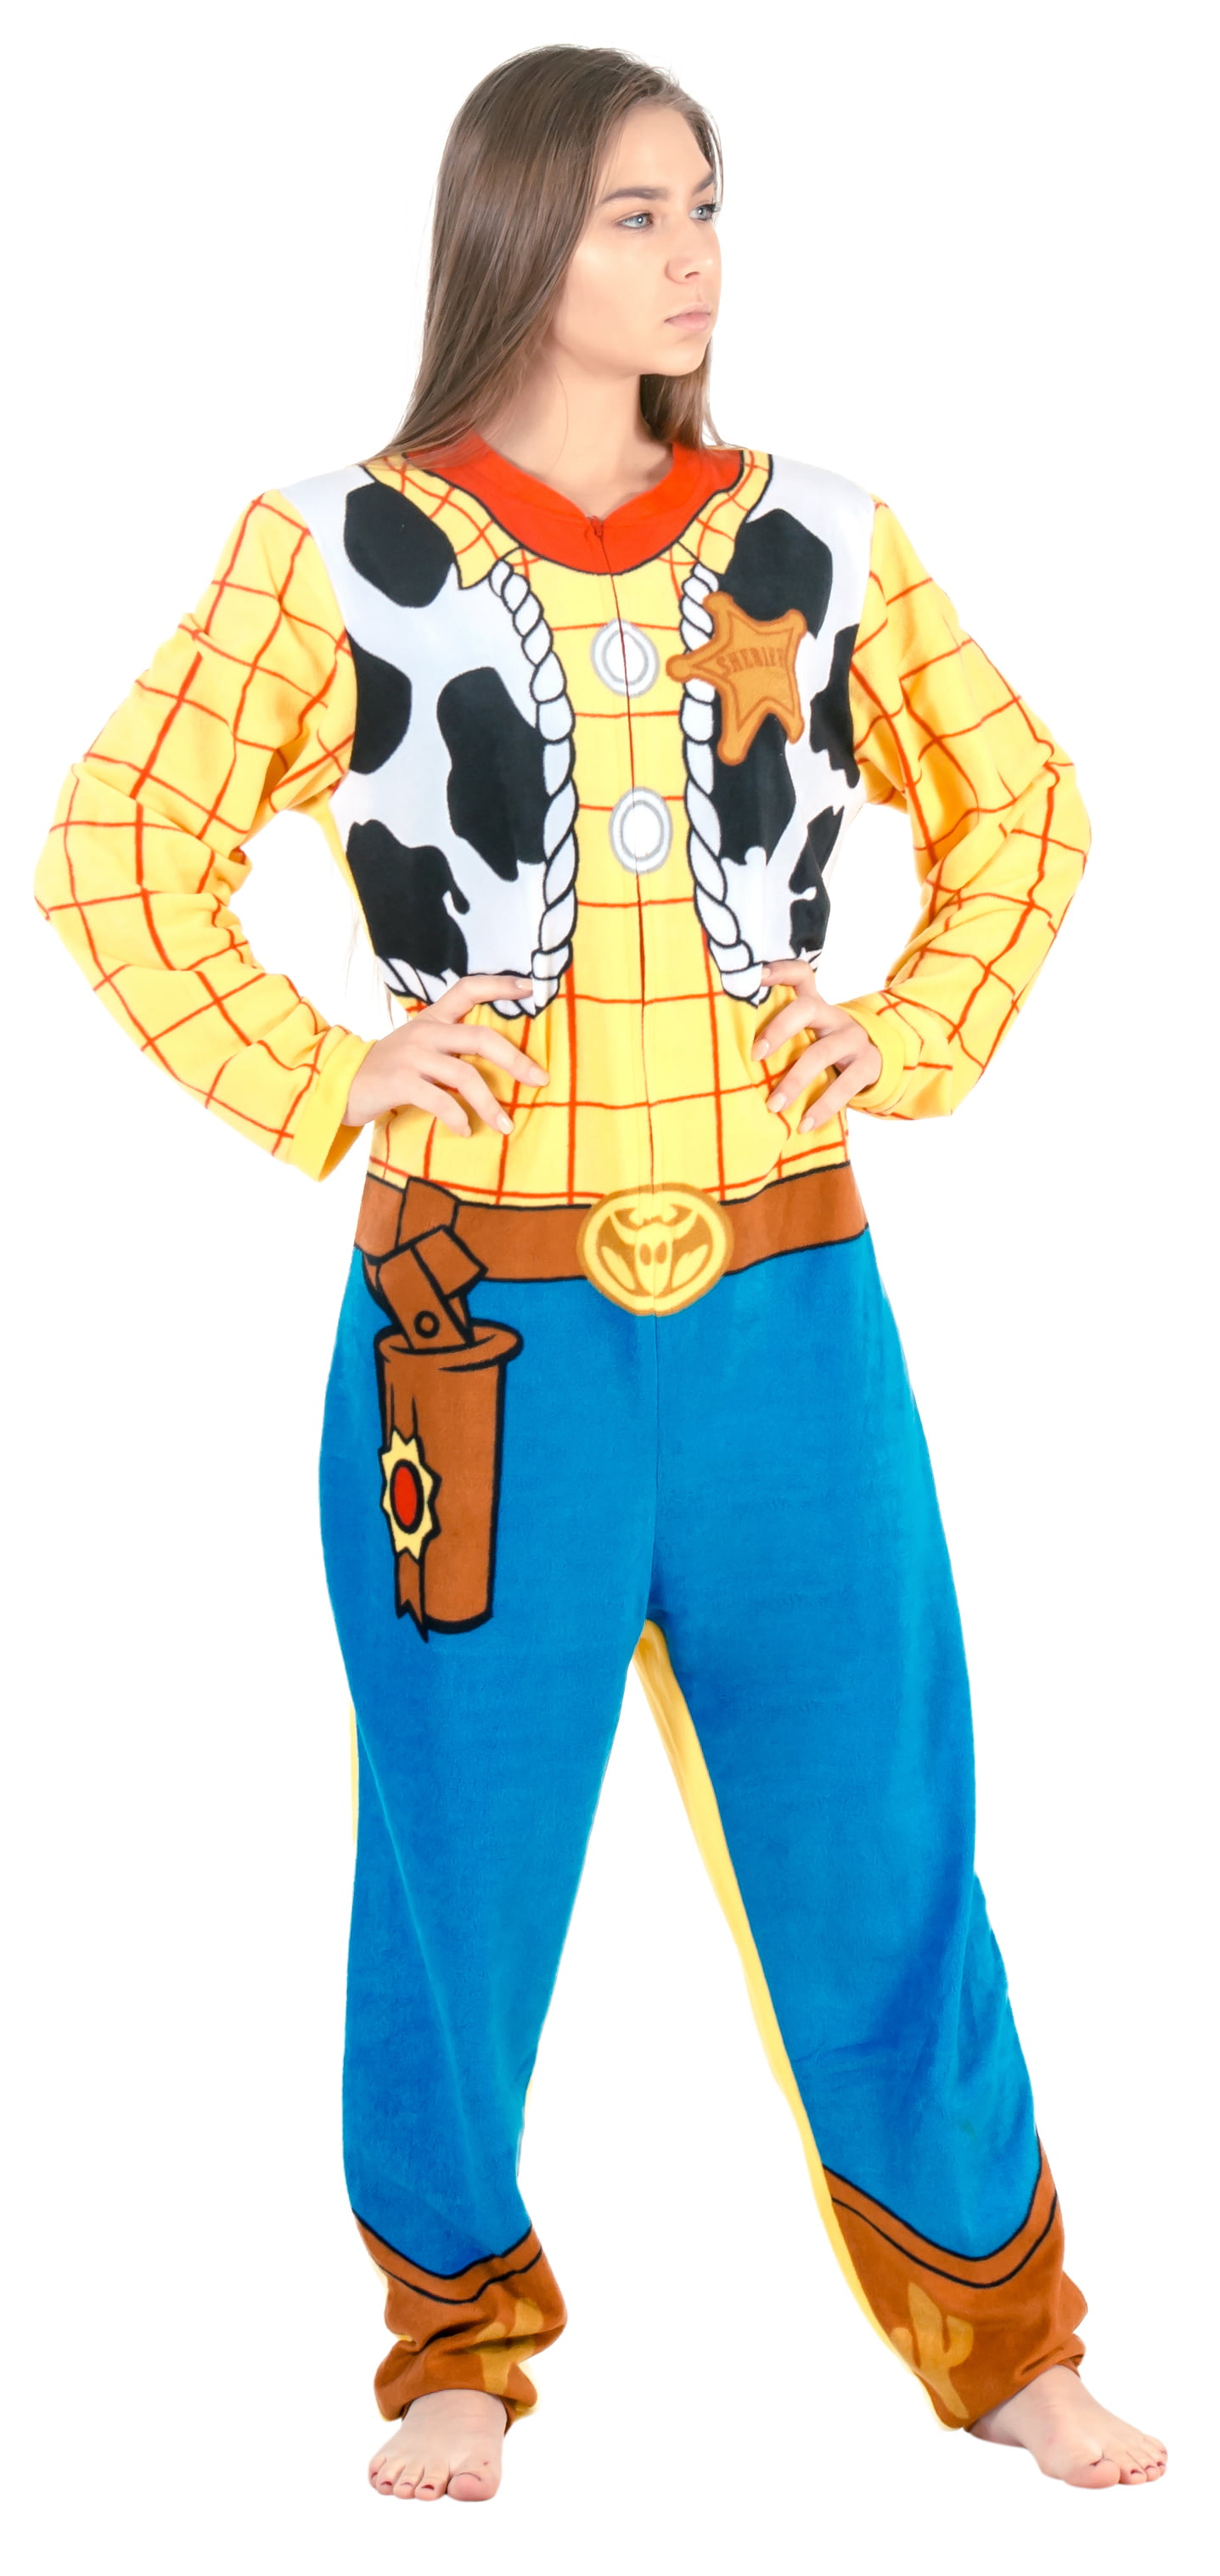 Toy Story Sheriff Woody Men's Hooded Union Suit Costume PERFECT FOR HALLOWEEN 